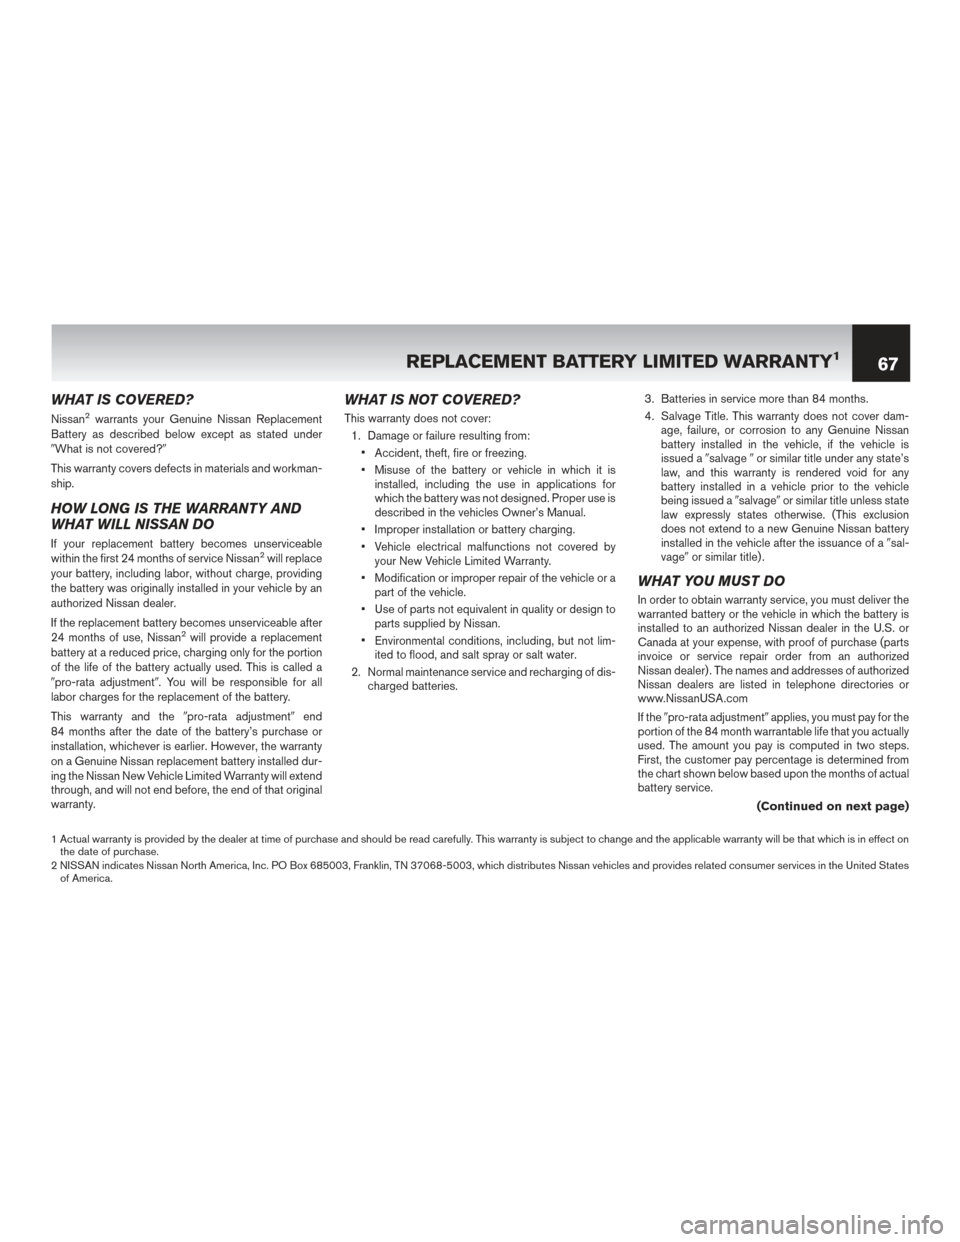 NISSAN MURANO HYBRID 2016 3.G Warranty Booklet WHAT IS COVERED?
Nissan2warrants your Genuine Nissan Replacement
Battery as described below except as stated under
What is not covered?
This warranty covers defects in materials and workman-
ship.
H